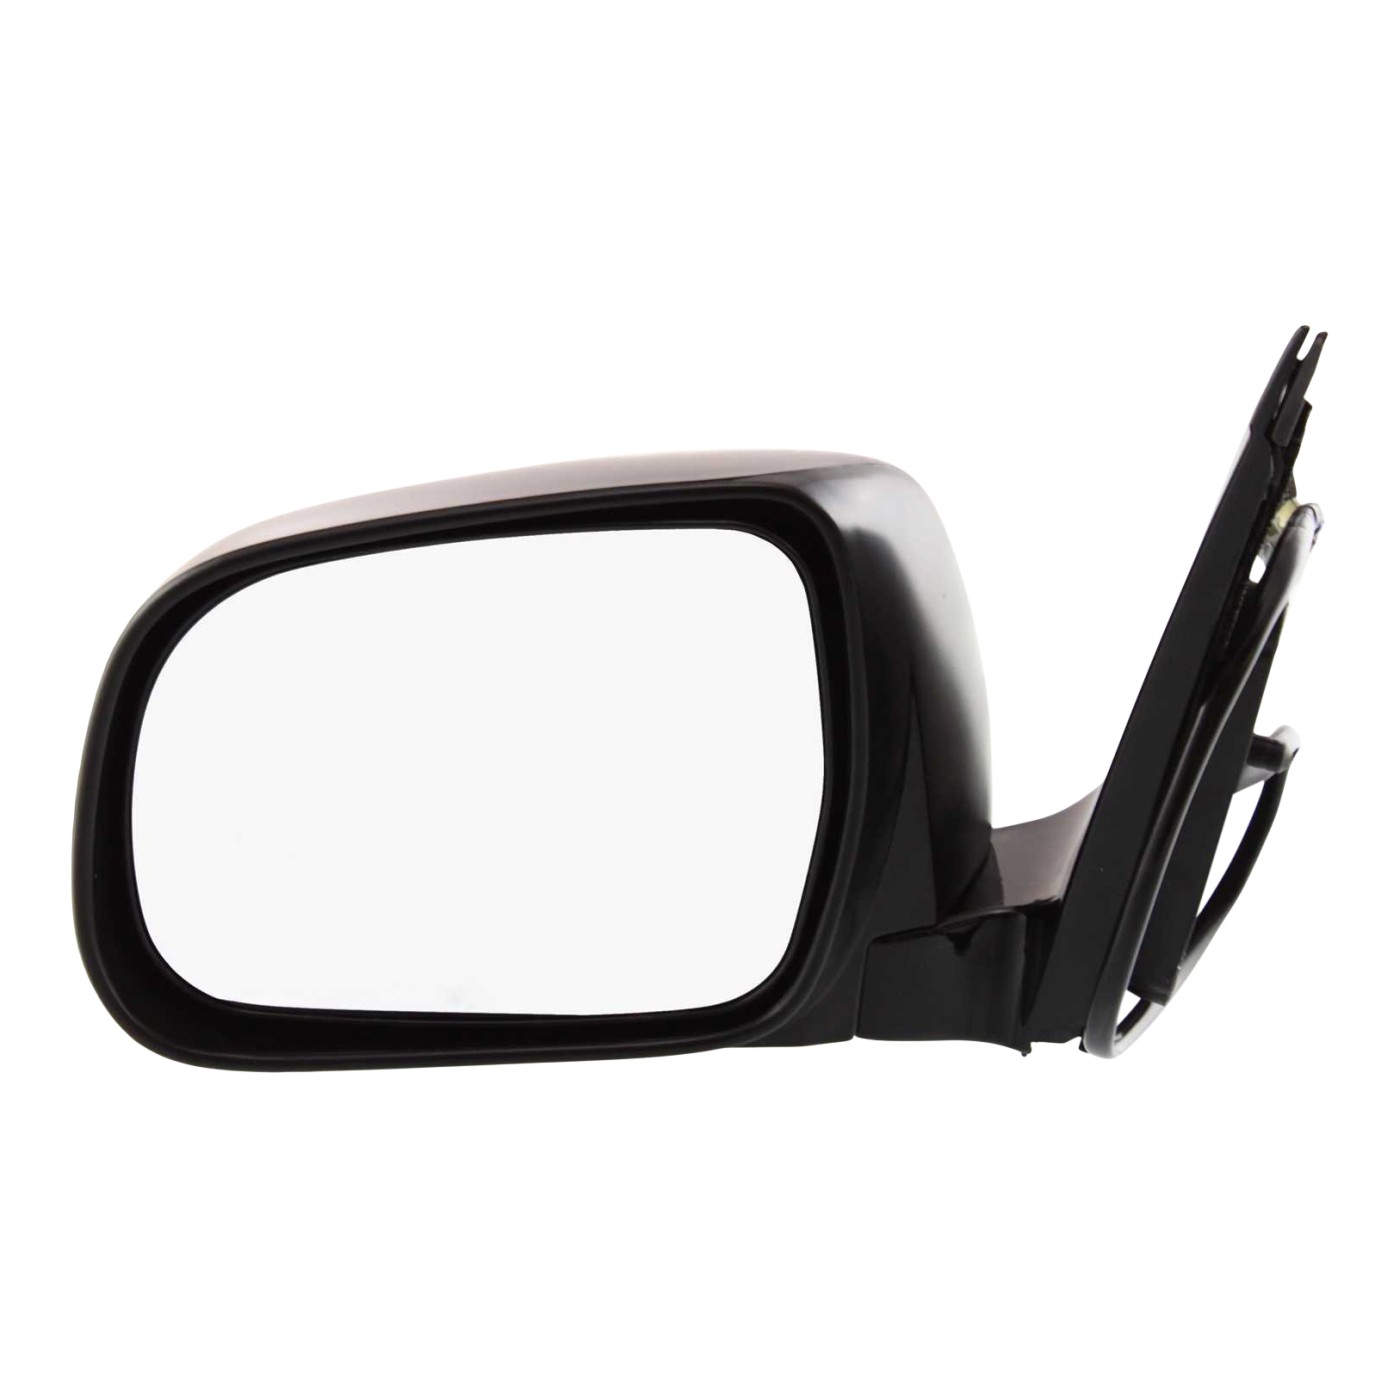 Power Heated Side View Mirror Driver Left LH for Lexus RX330 RX350 RX400H | eBay 2008 Lexus Rx 350 Driver Side Mirror Replacement